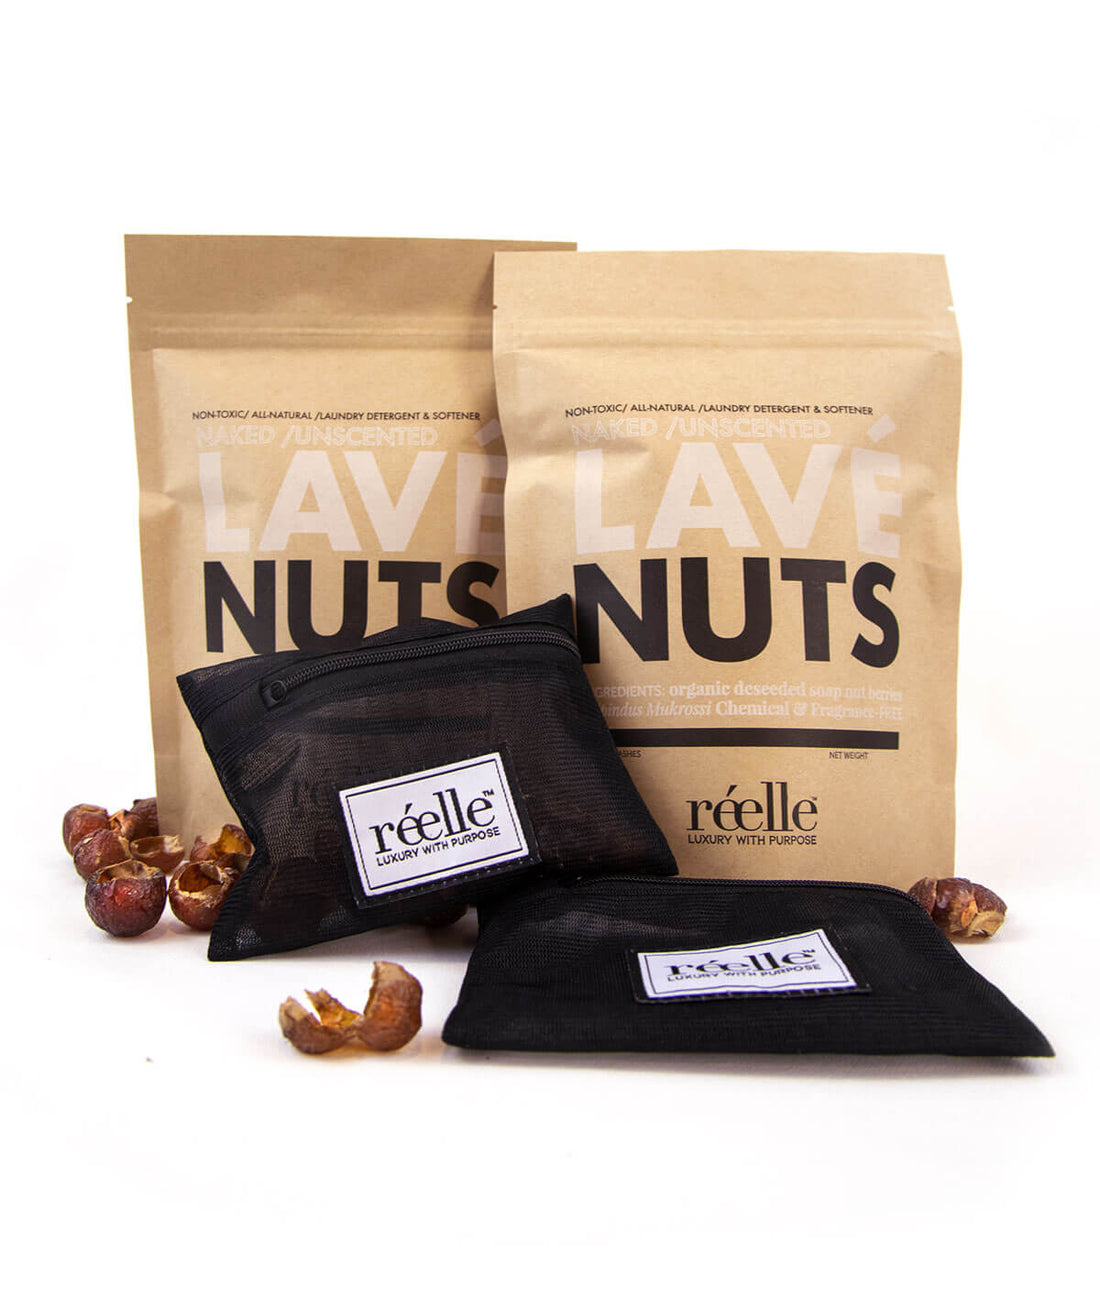 Lavé soap Nuts Dual packaged bags and their two mesh wash pouches by réelle